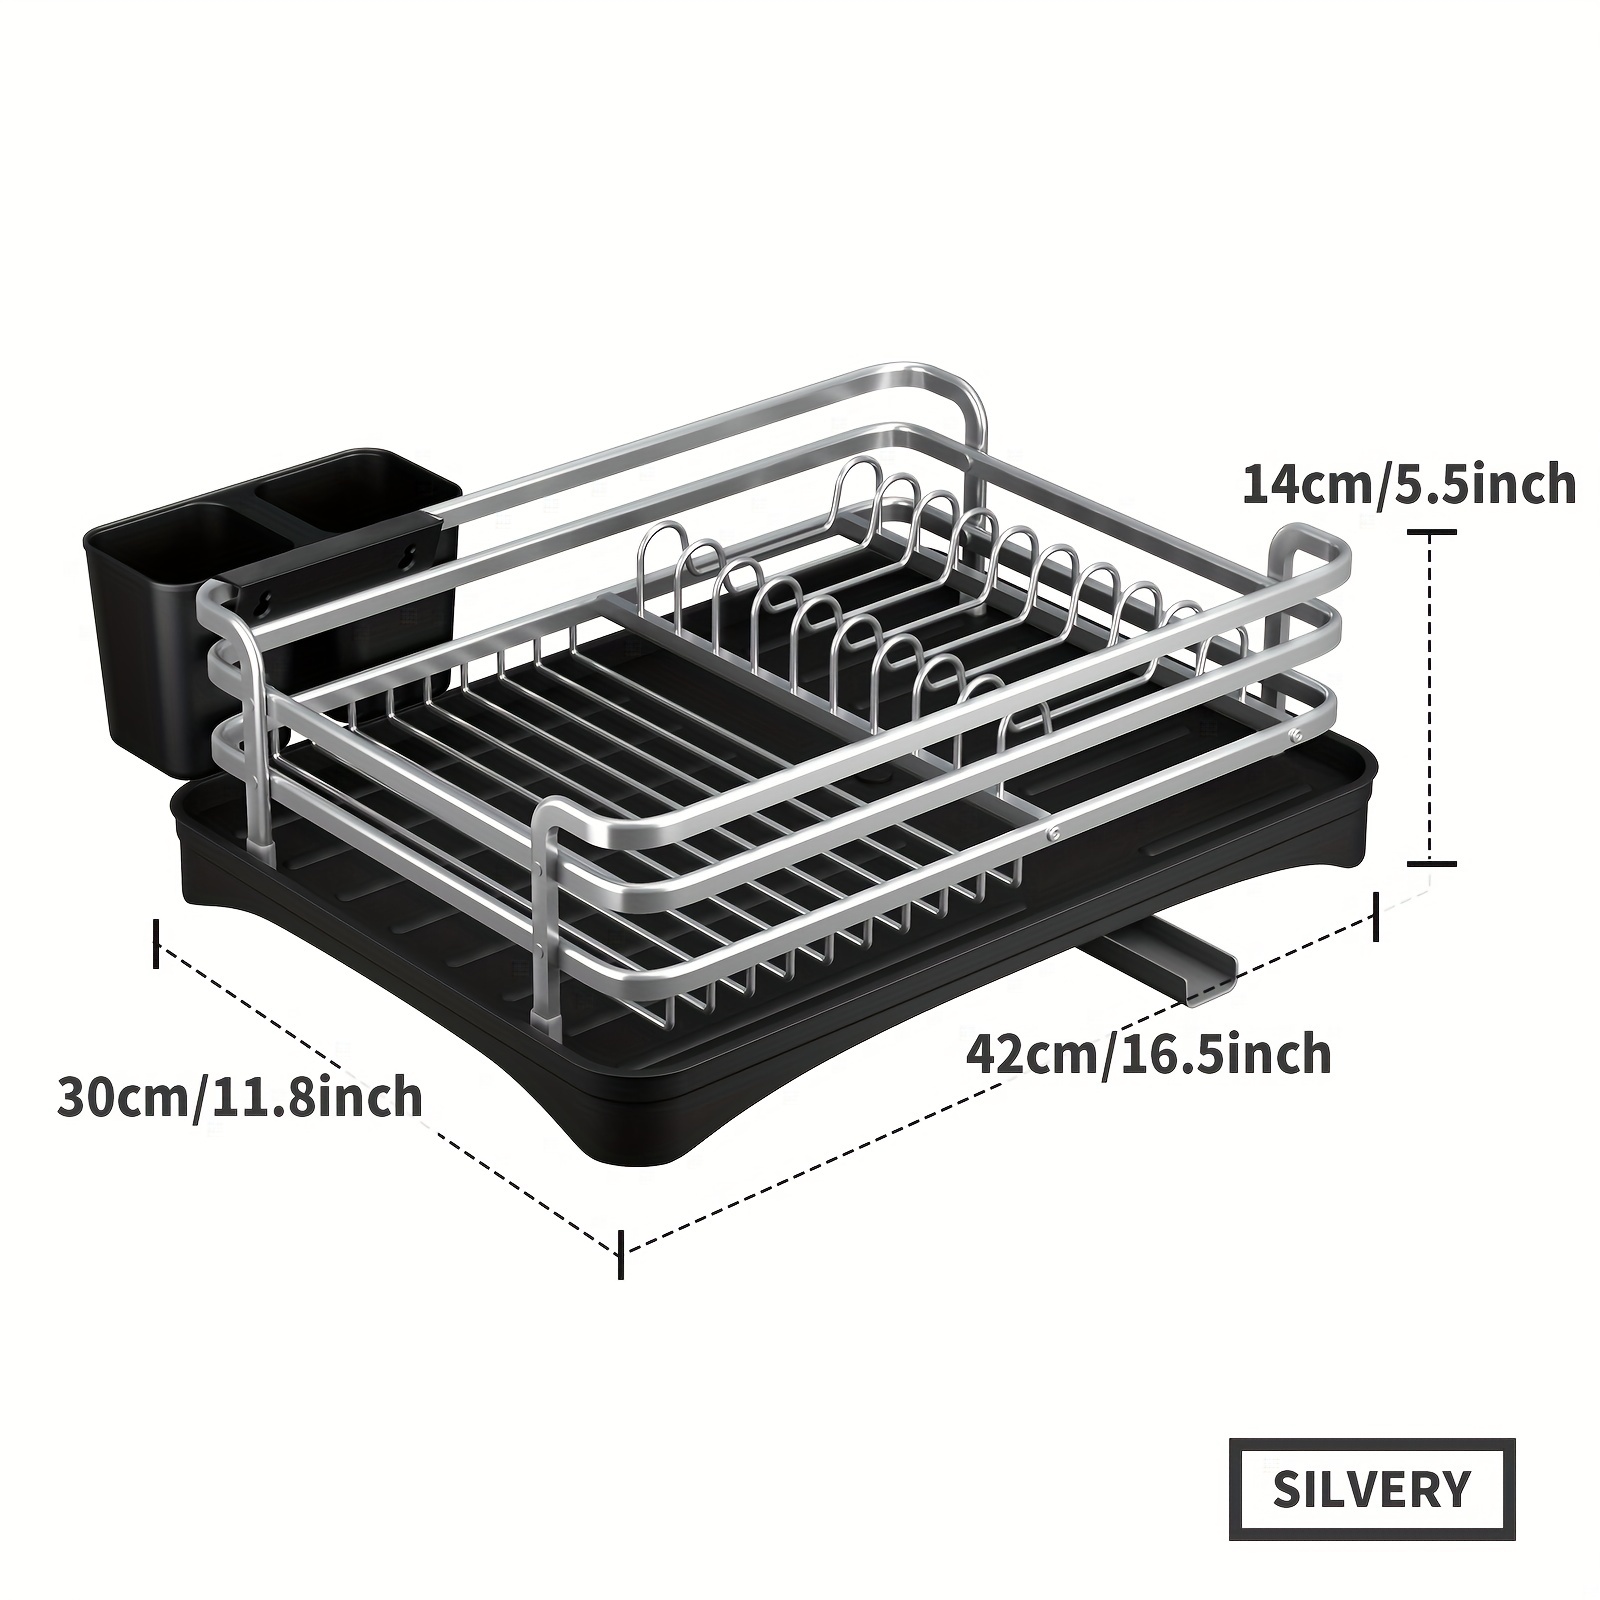 Dish Drying Rack With Drainboard,aluminum Rust Proof Dish Dryer